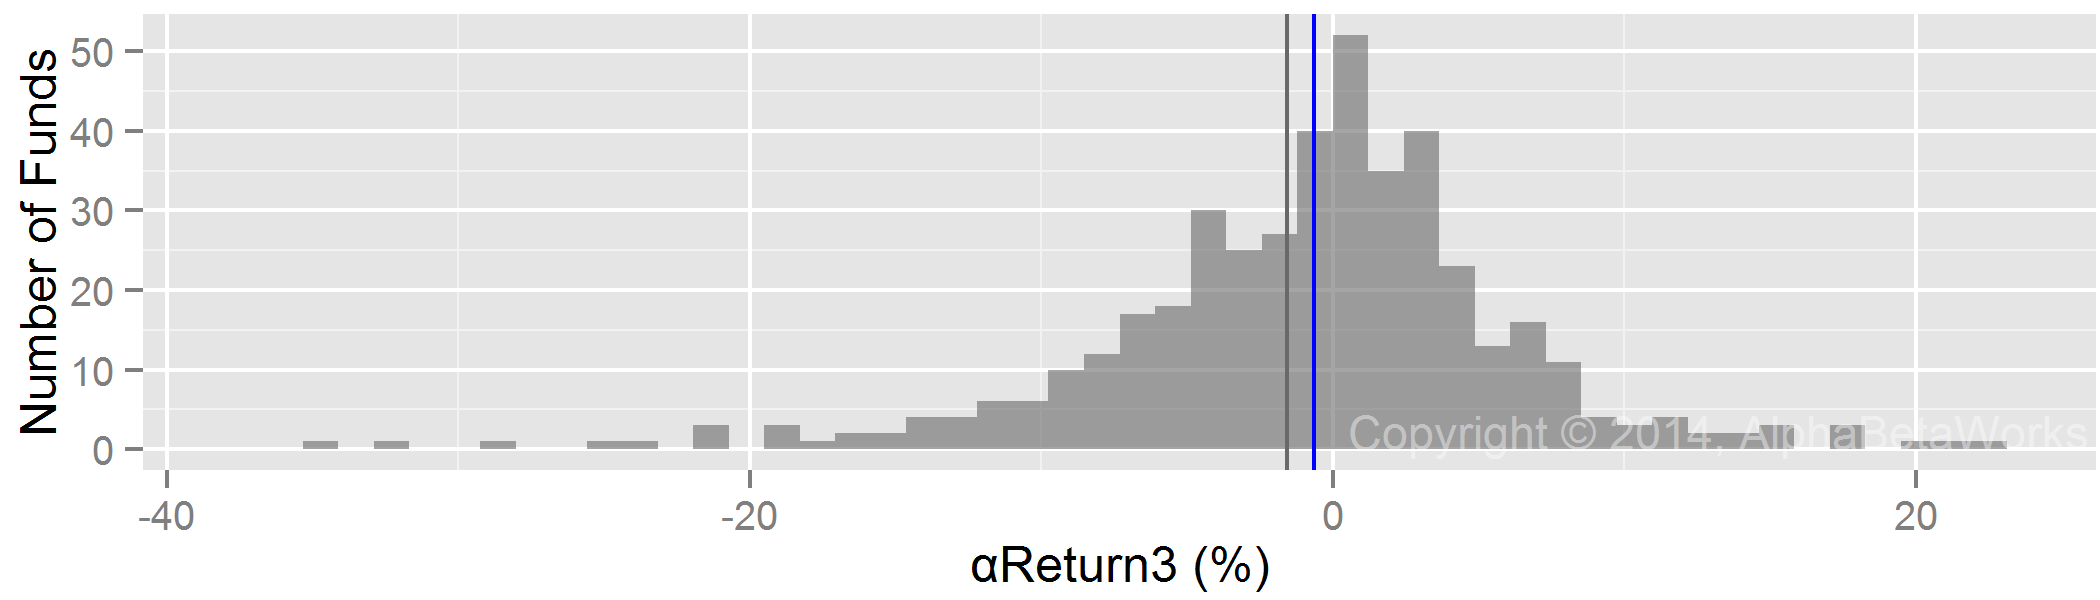 Chart of the Security Selection Return Distribution of Paulson & Co and Peer Long Equity Portfolios